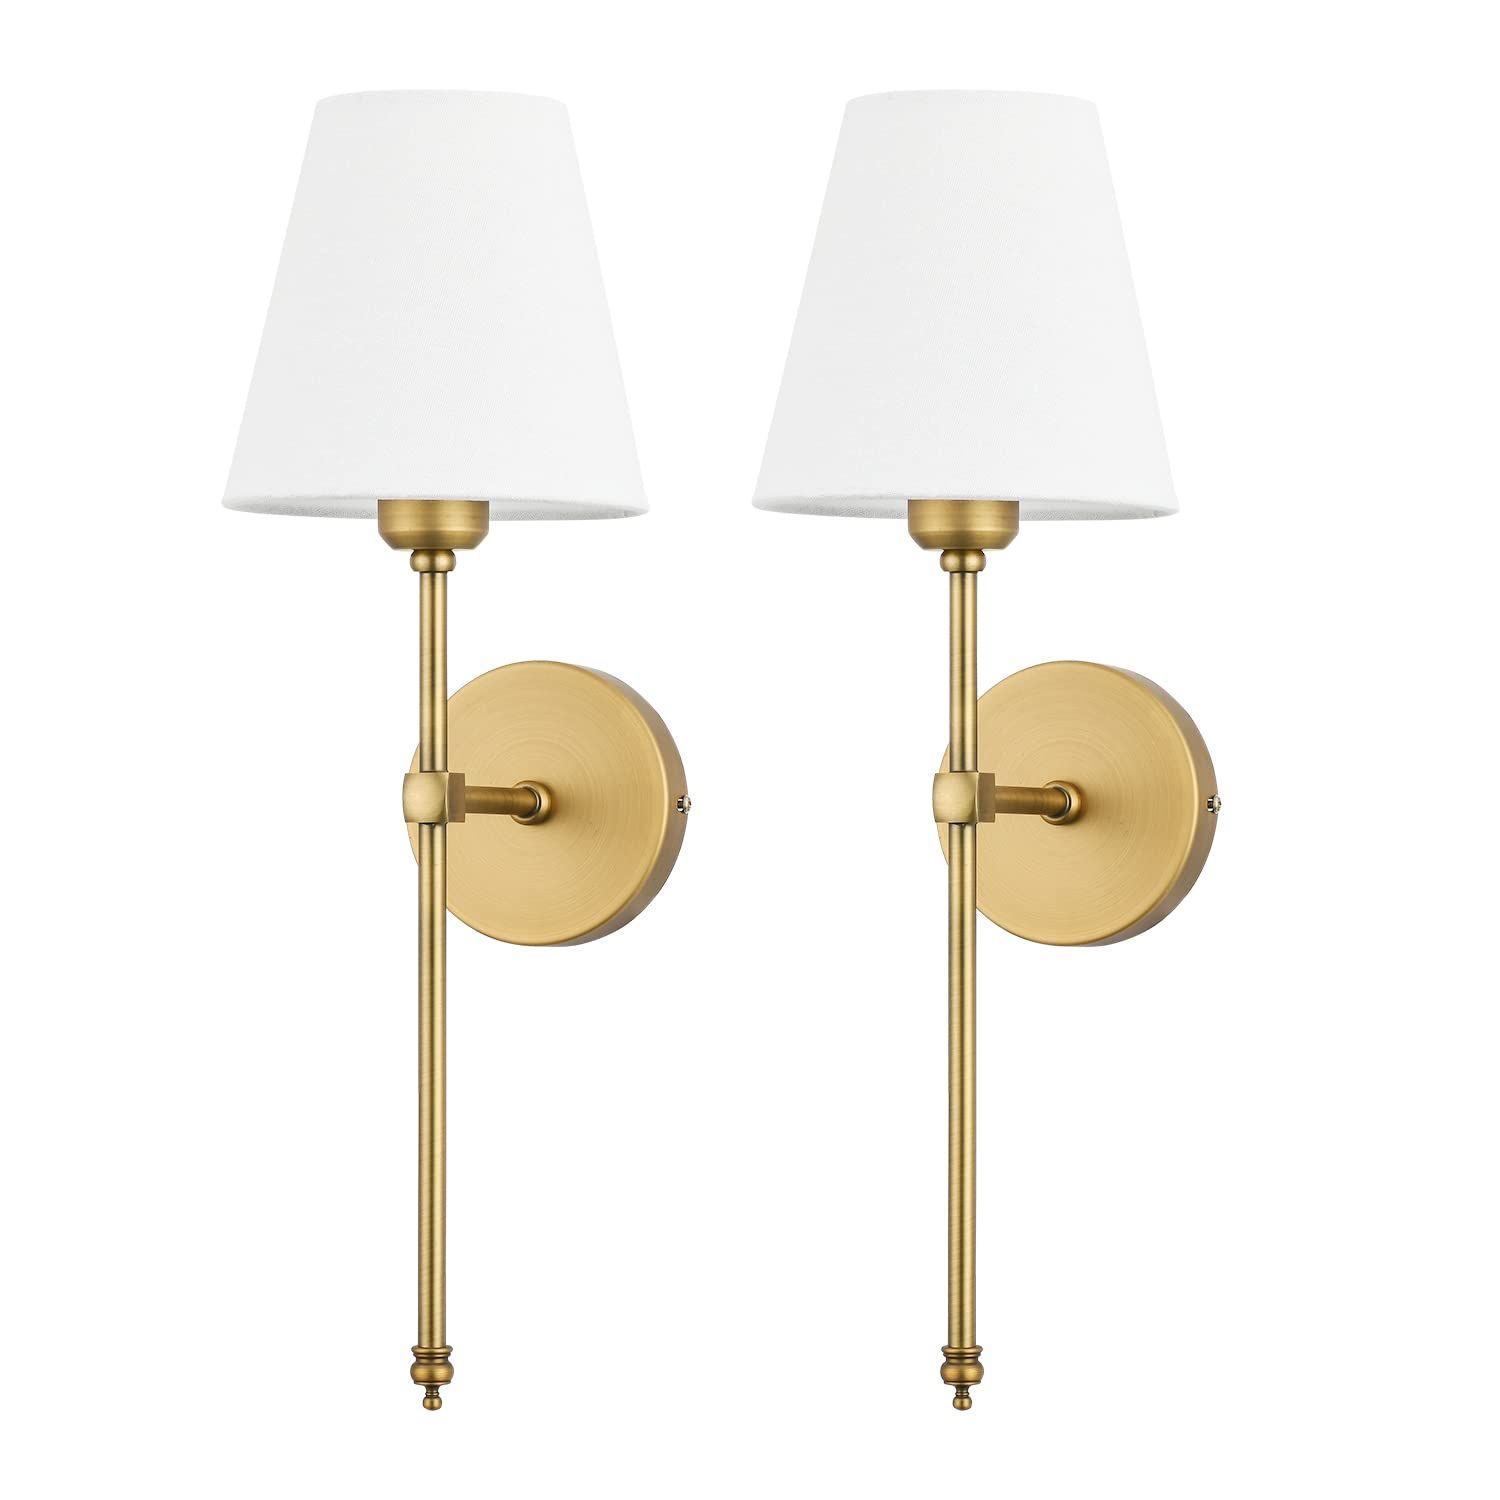 Bsmathom Wall Sconces Sets of 2, Classic Brushed Brass Sconces Wall Lighting, Hardwired Bathroom ... | Amazon (US)